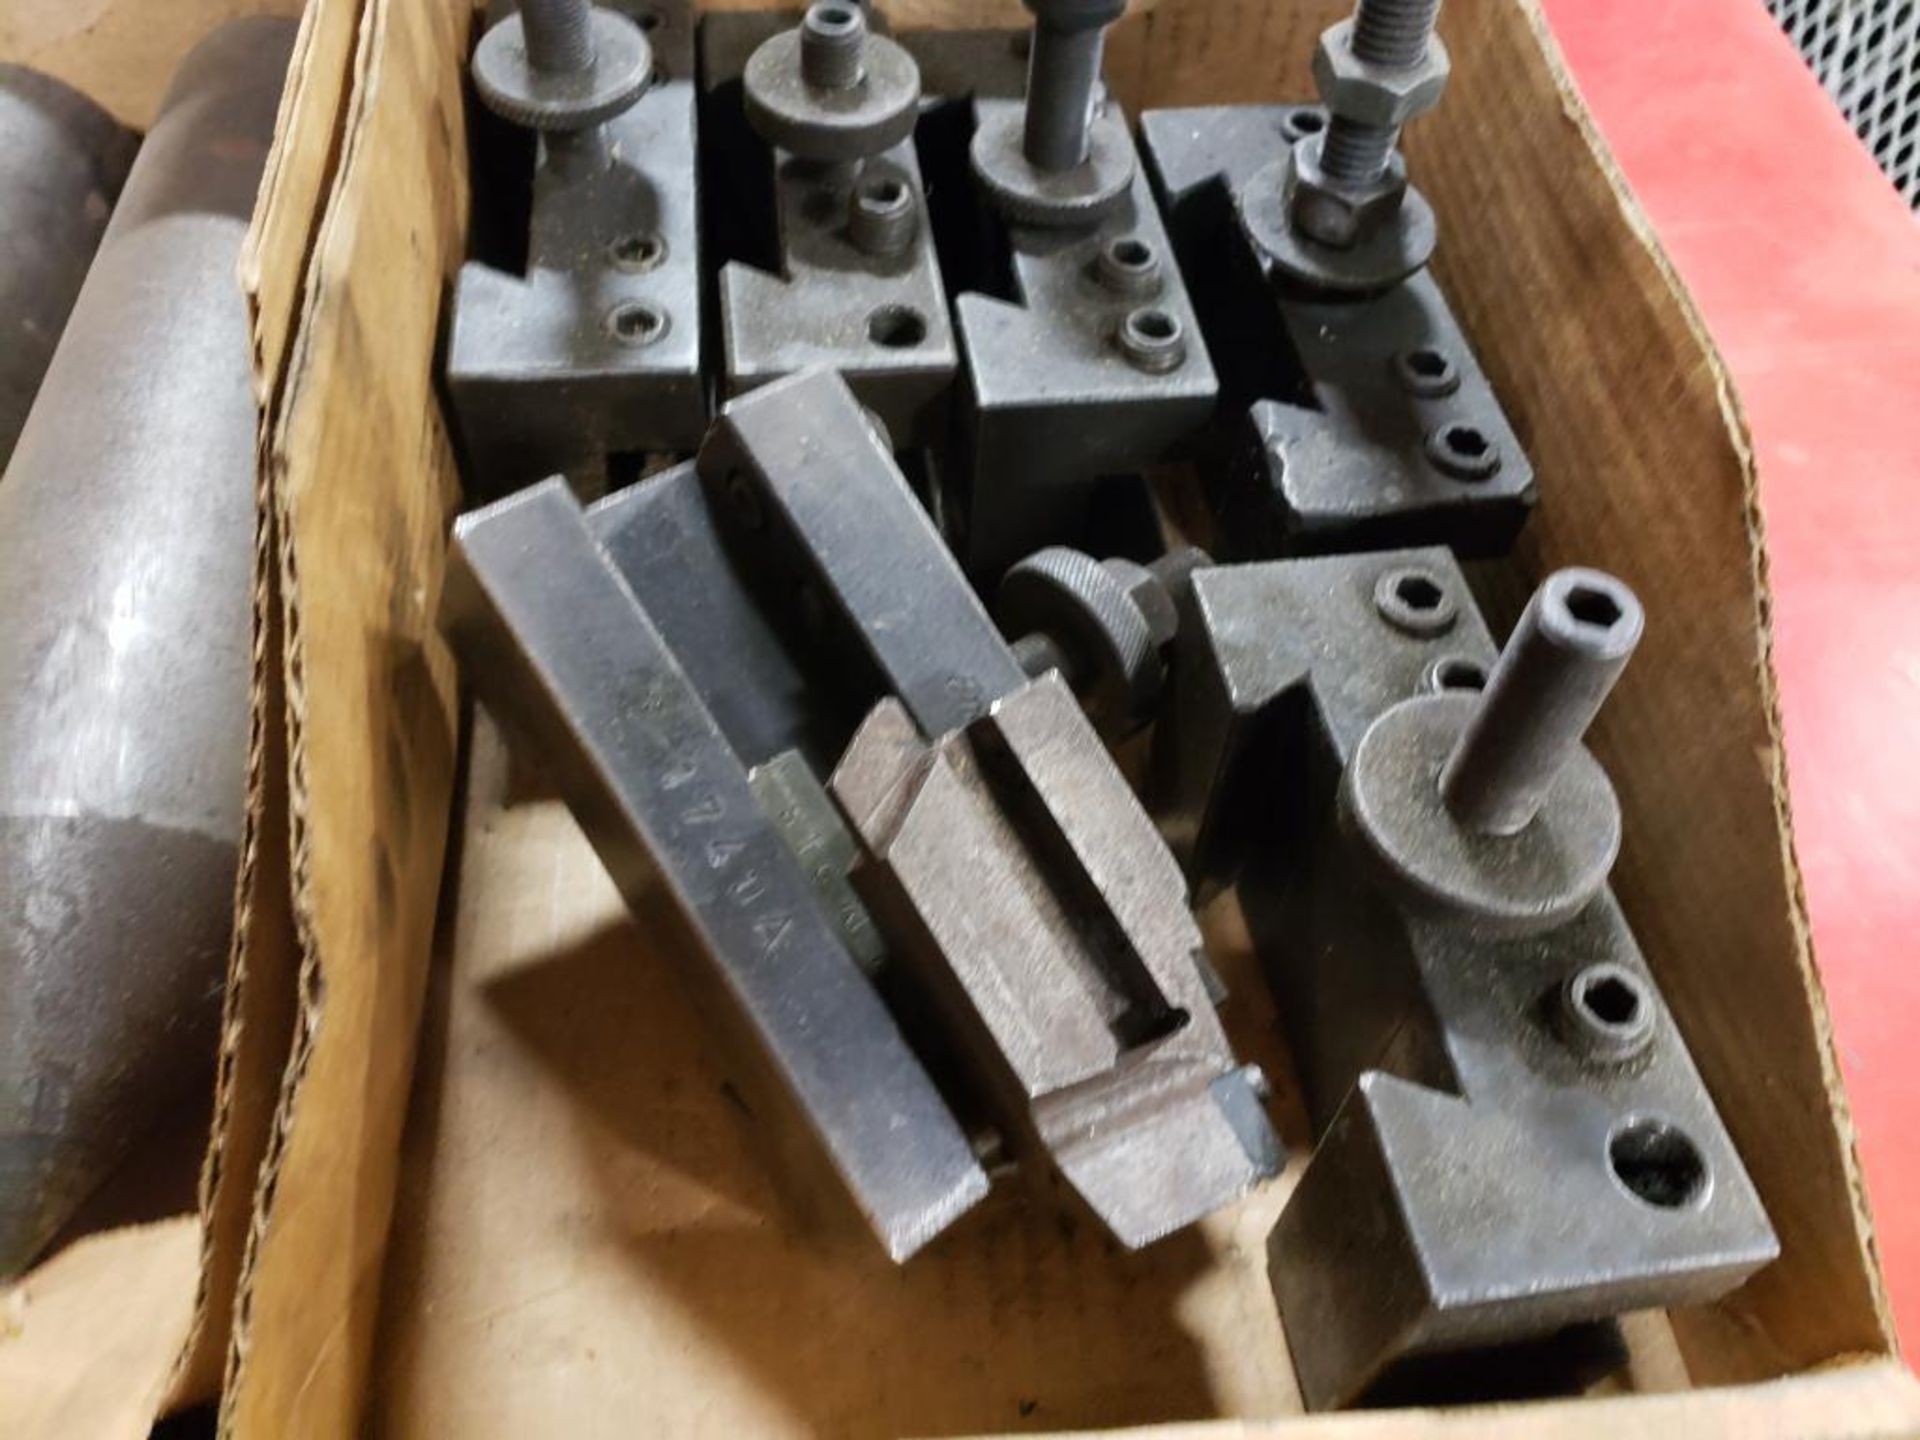 Assorted metalworking tooling. - Image 3 of 4